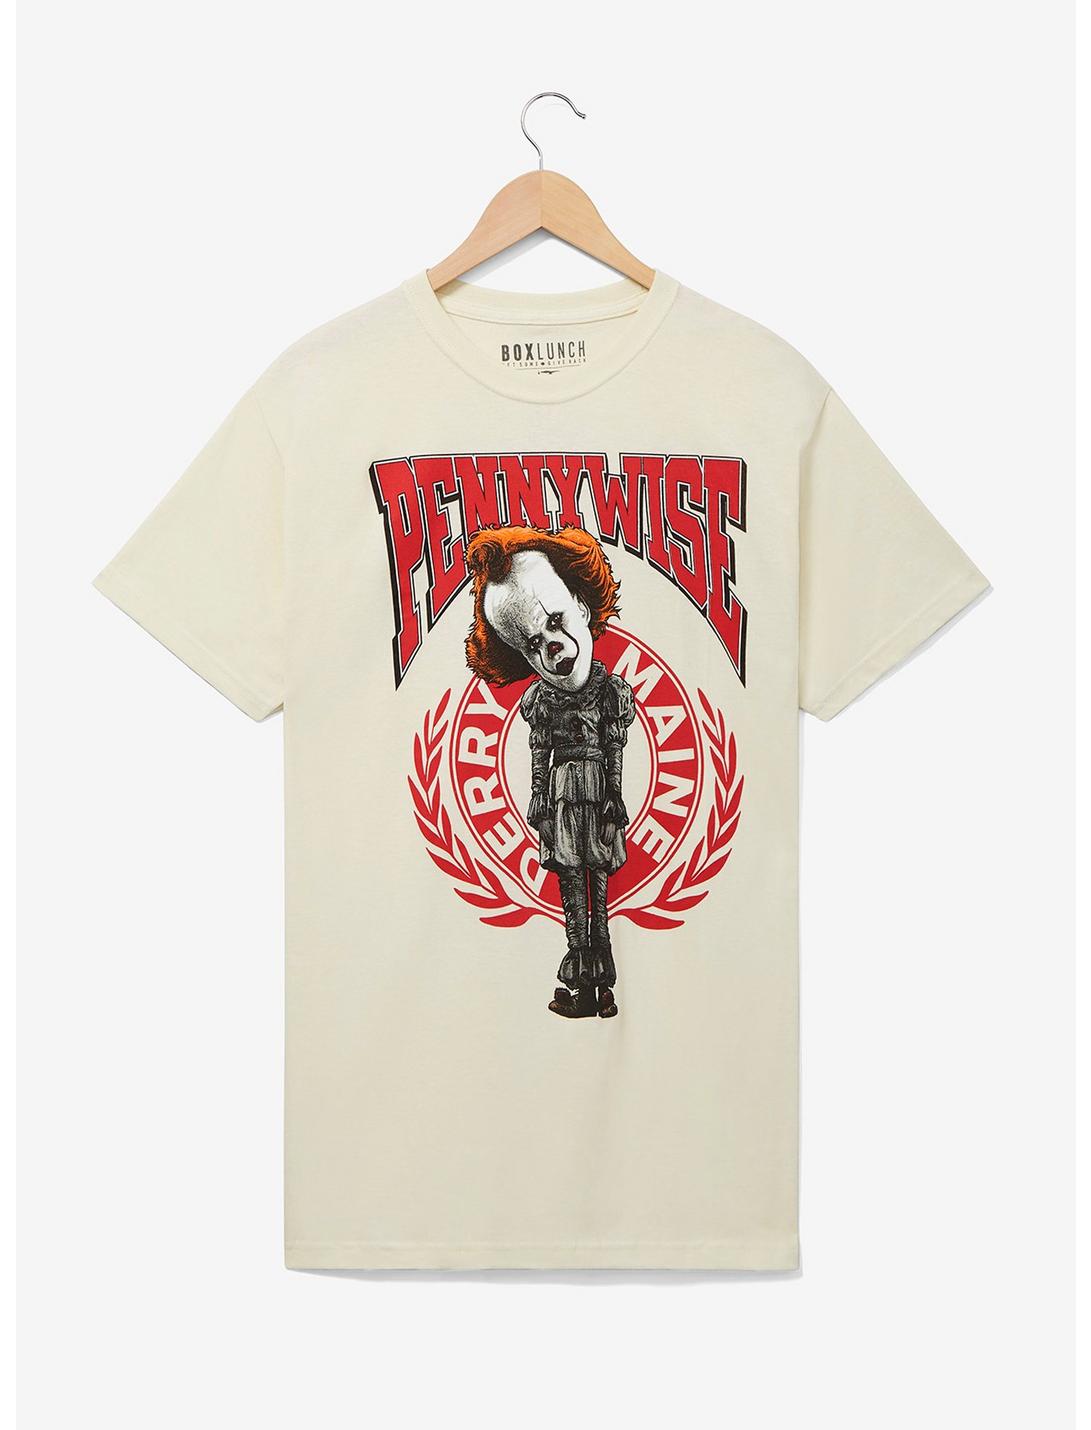 It Pennywise the Clown Portrait T-Shirt - BoxLunch Exclusive, TANBEIGE, hi-res